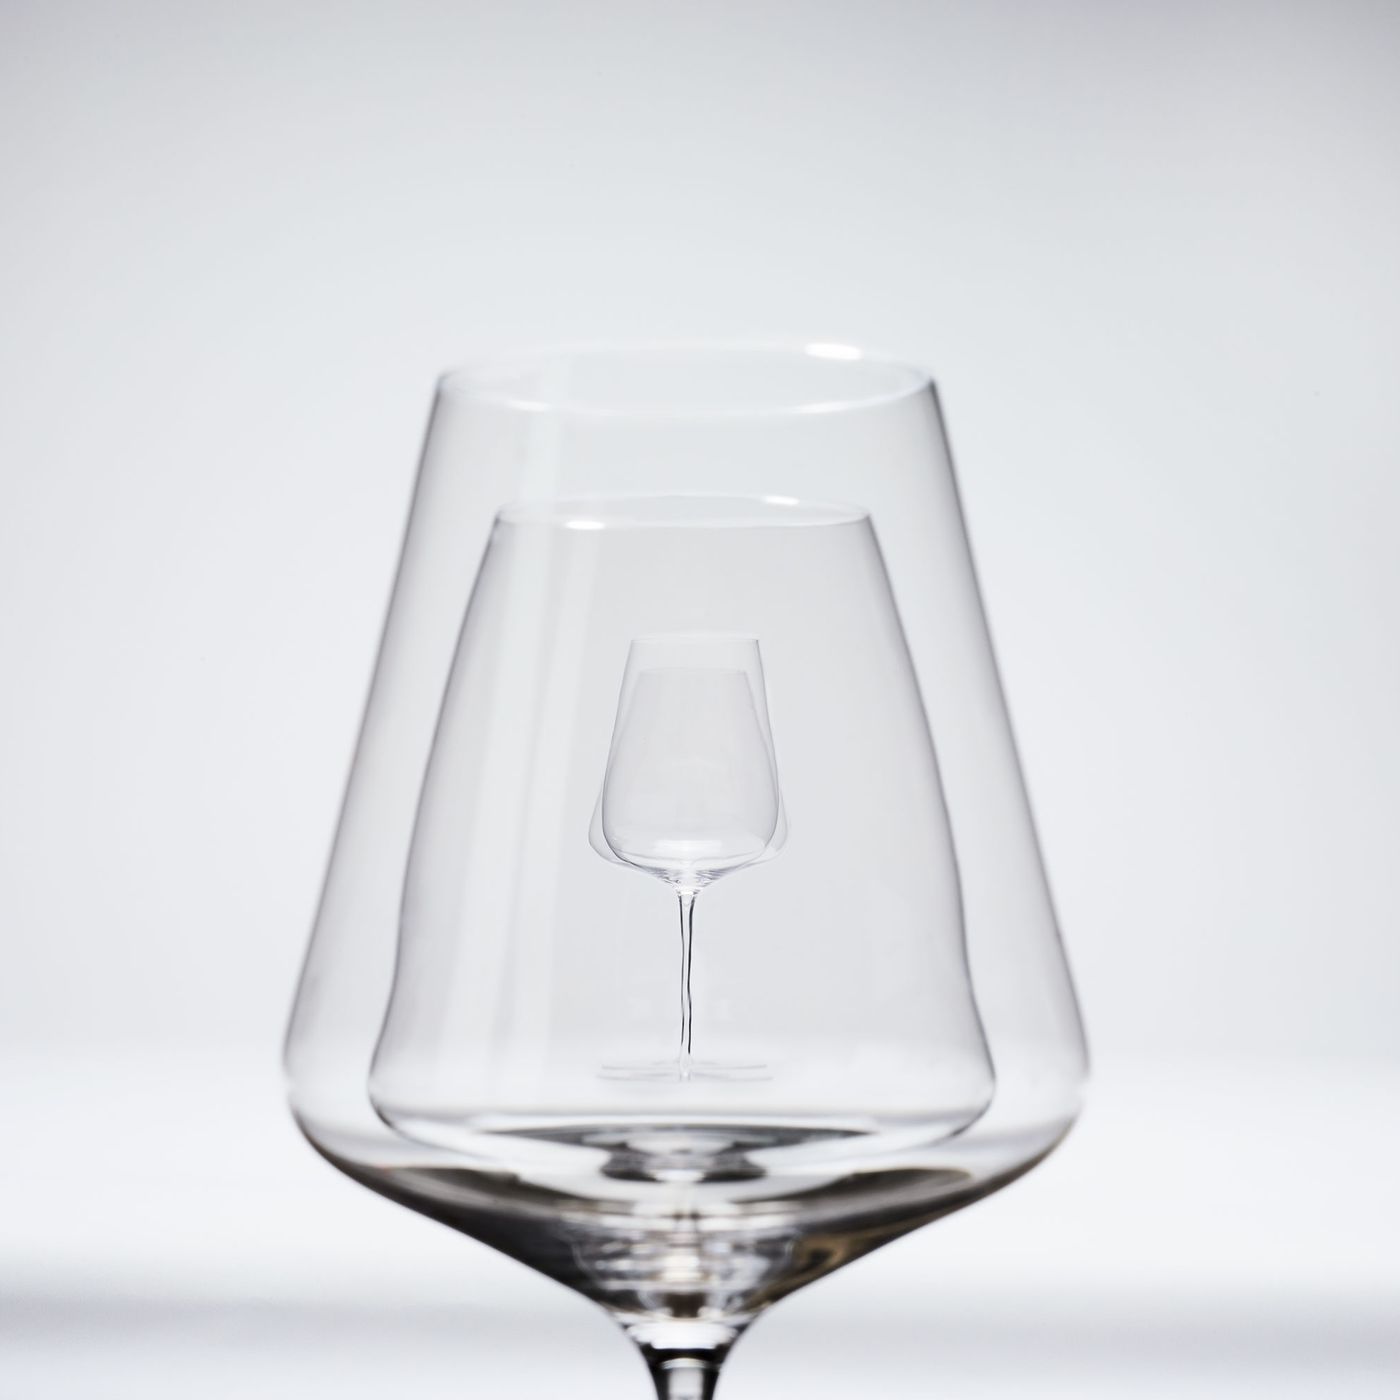 Top 5) Best Square Wine Glasses You Can Buy Online